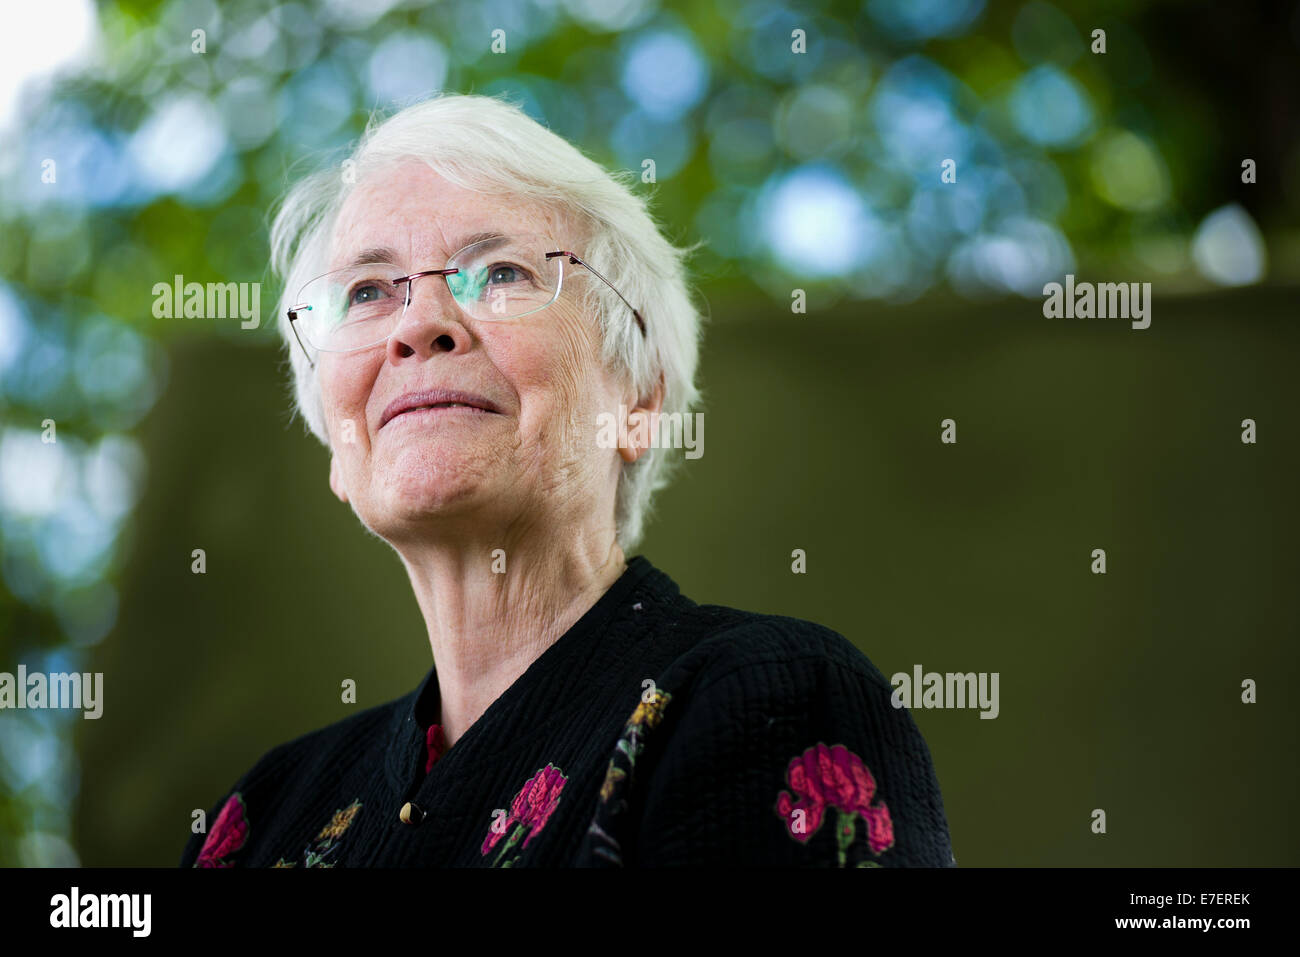 British writer of children's fiction and travel Elizabeth Laird appears at the Edinburgh International Book Festival. Stock Photo